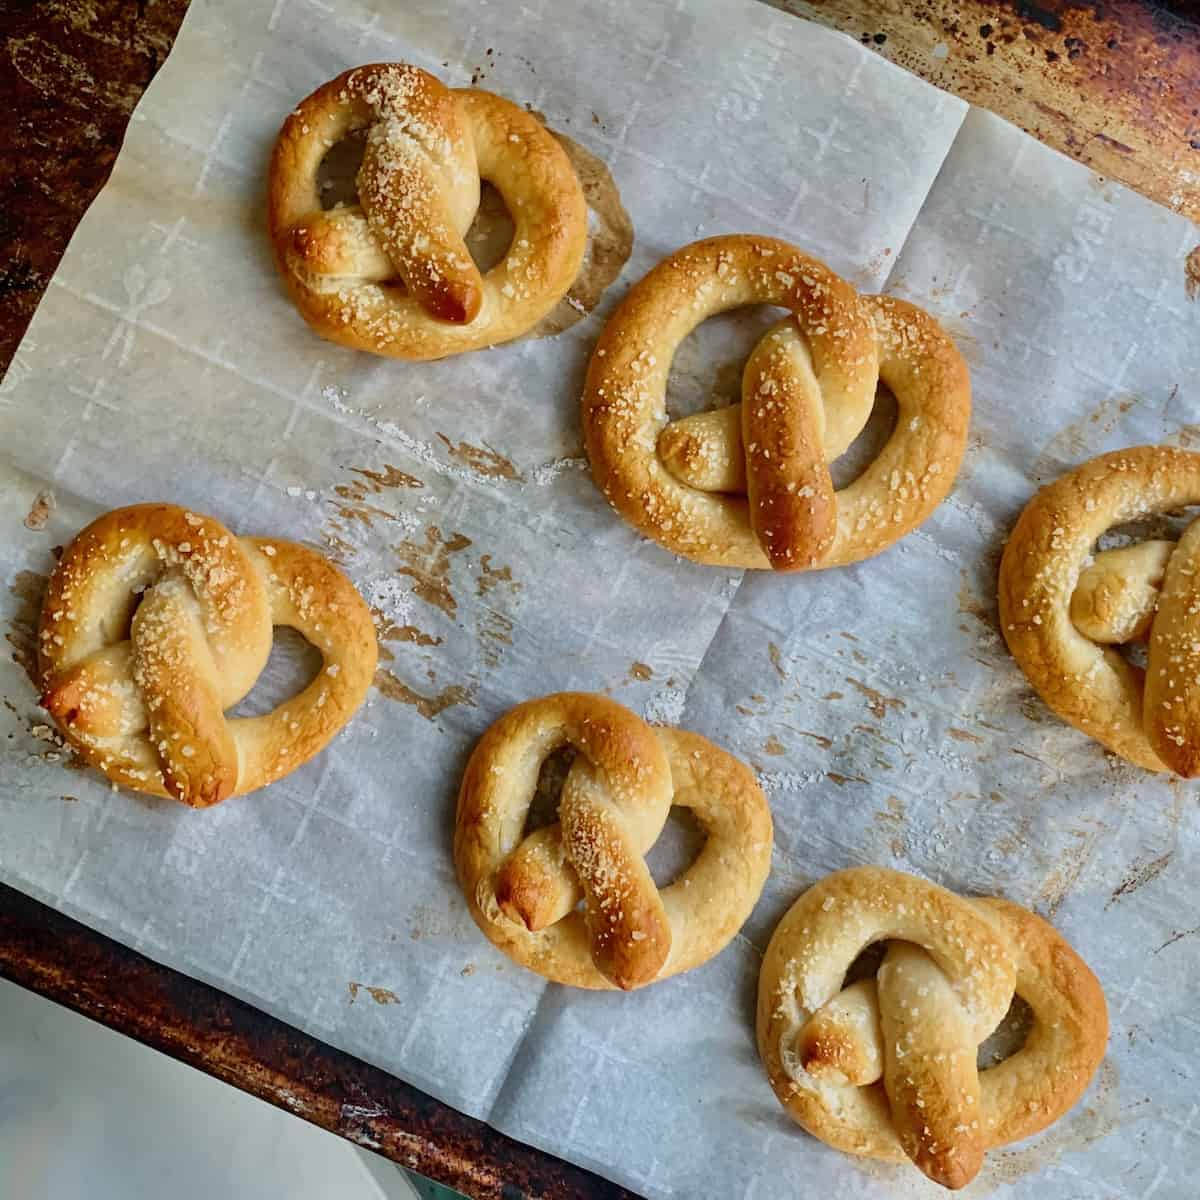 Birds Eye view: 6 baked gluten-free soft pretzels with salt on a baking sheet with parchment paper.